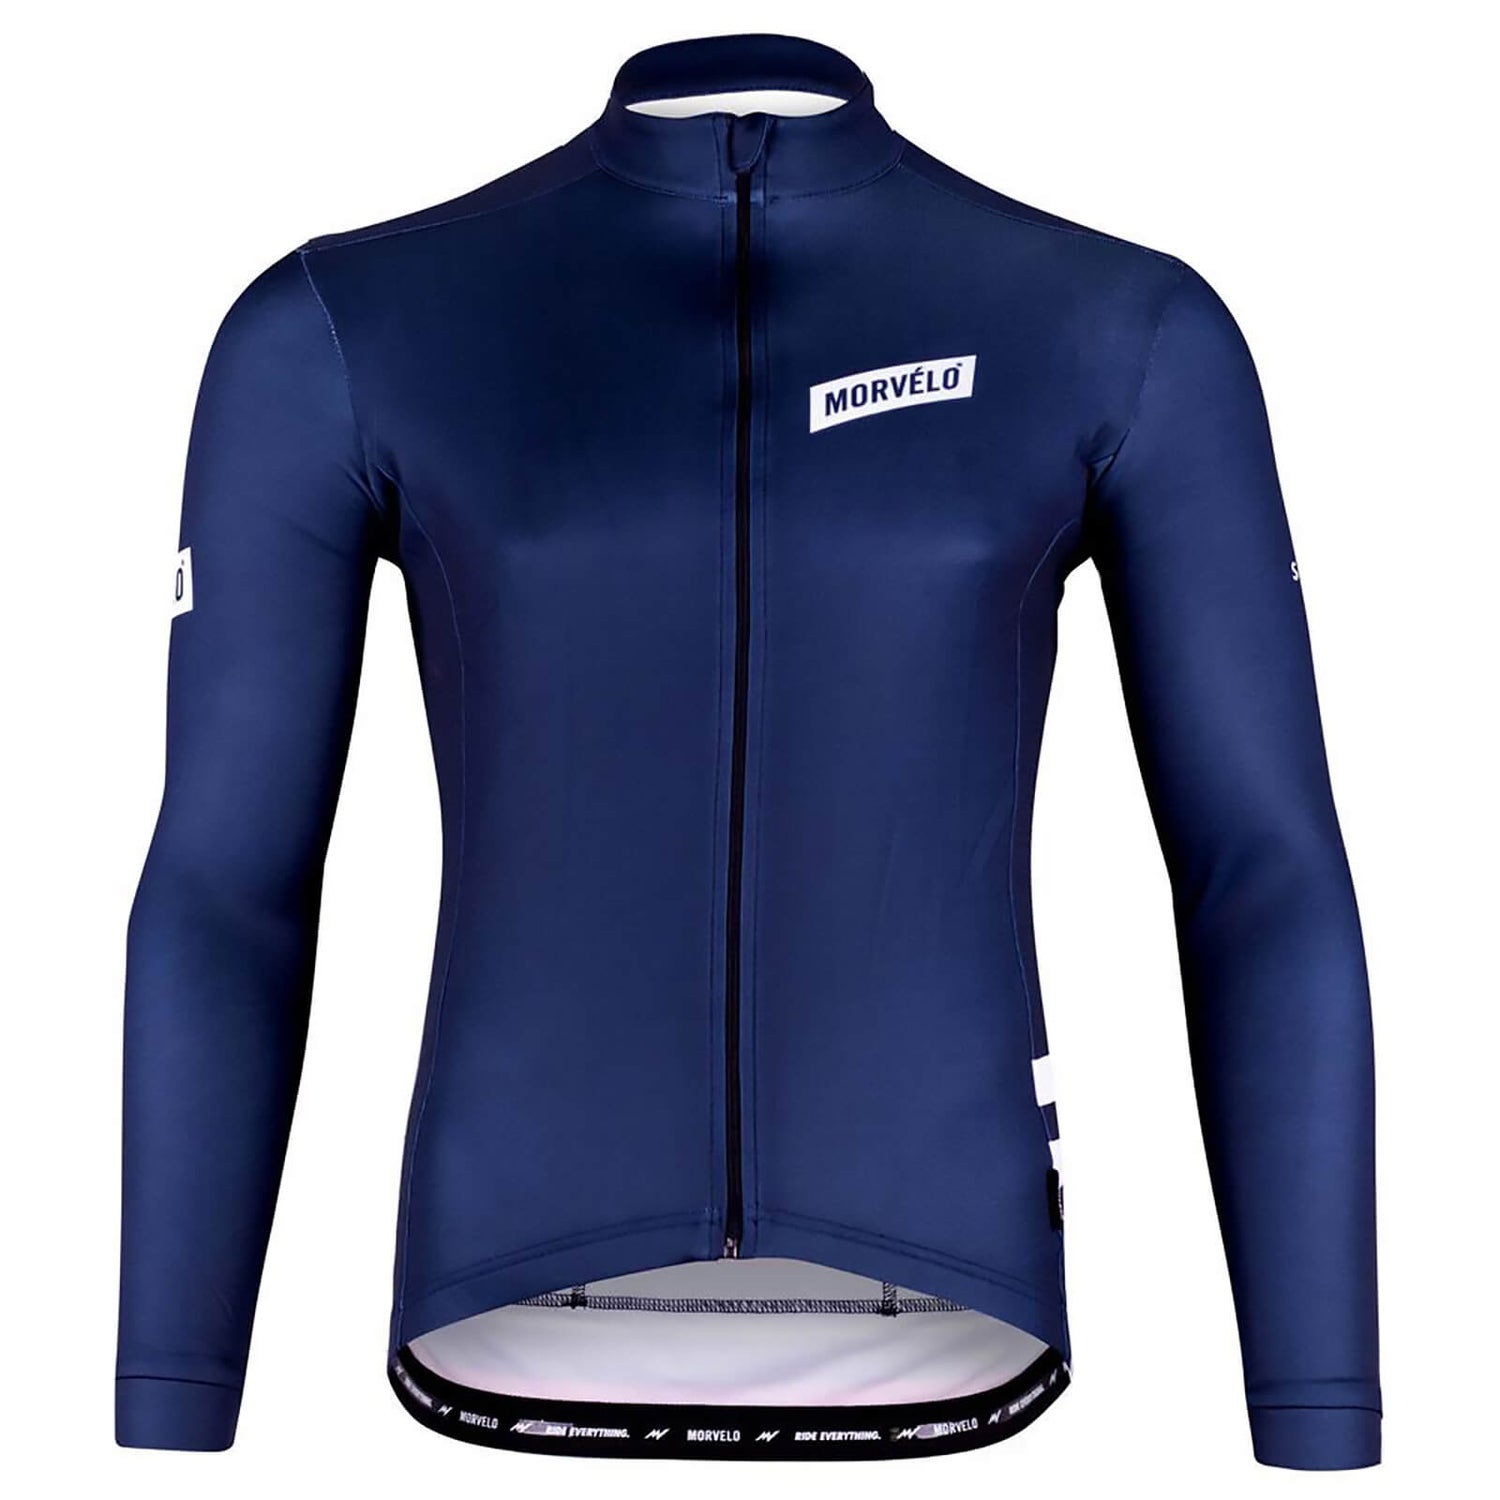 Navy Stealth ThermoActive Long Sleeve Jersey